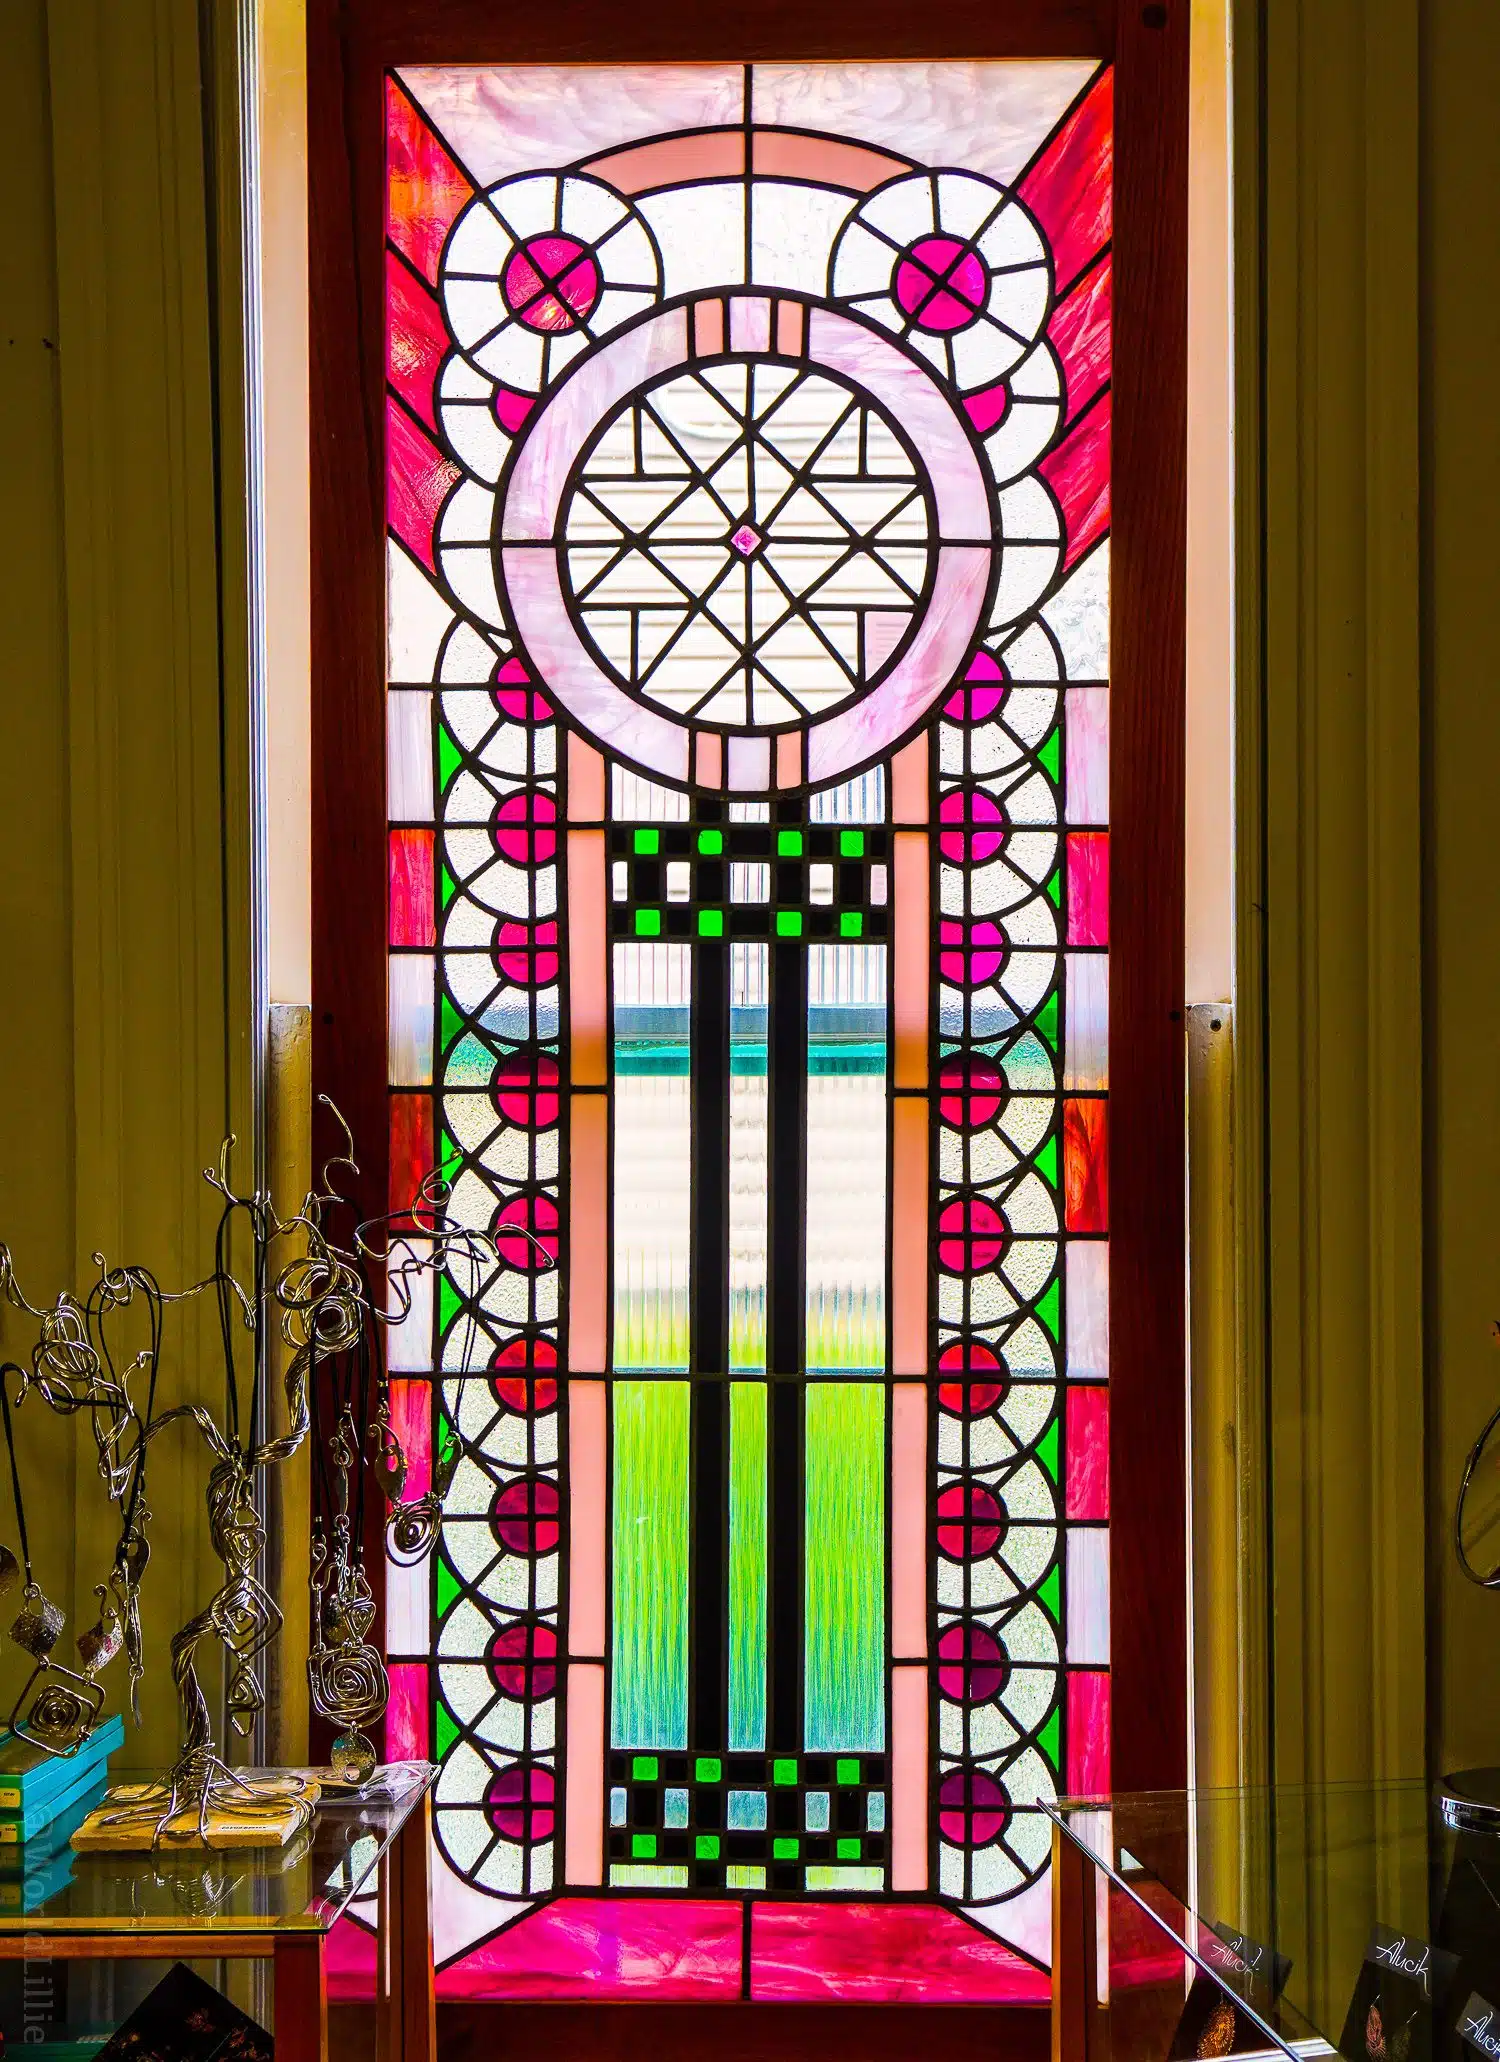 Mandy's stained glass windows are stunning.